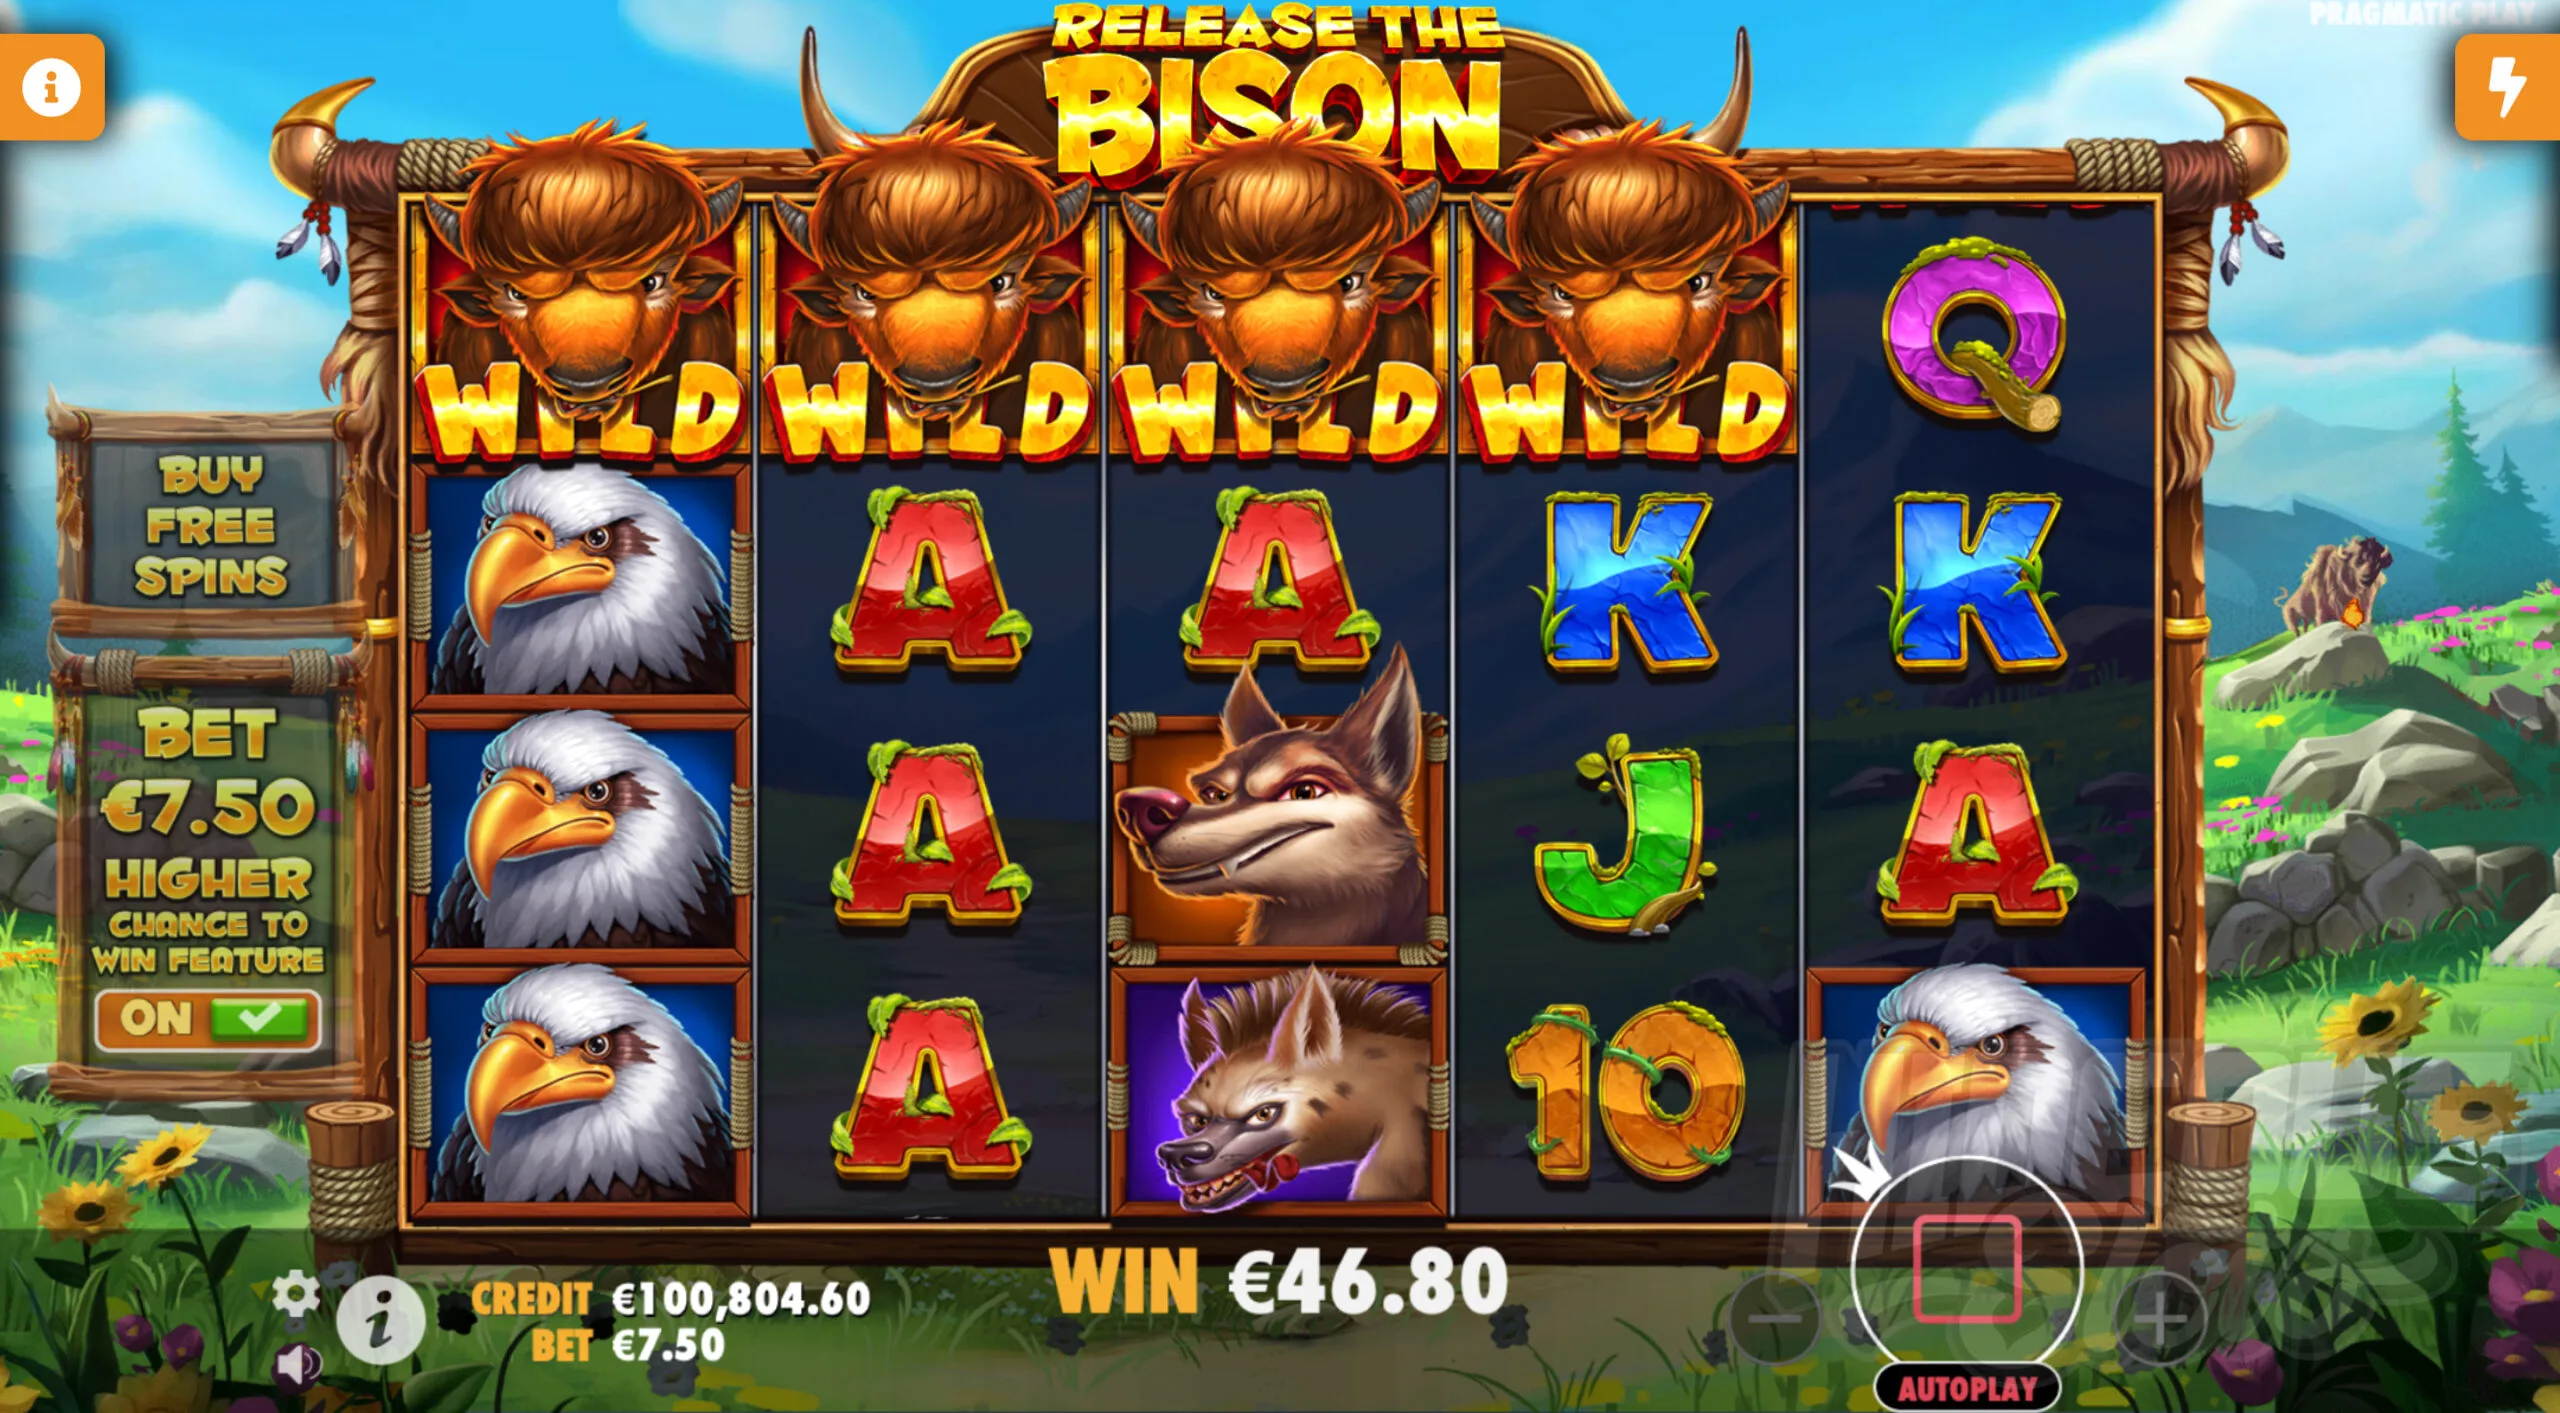 Release the Bison Wild Respin Feature